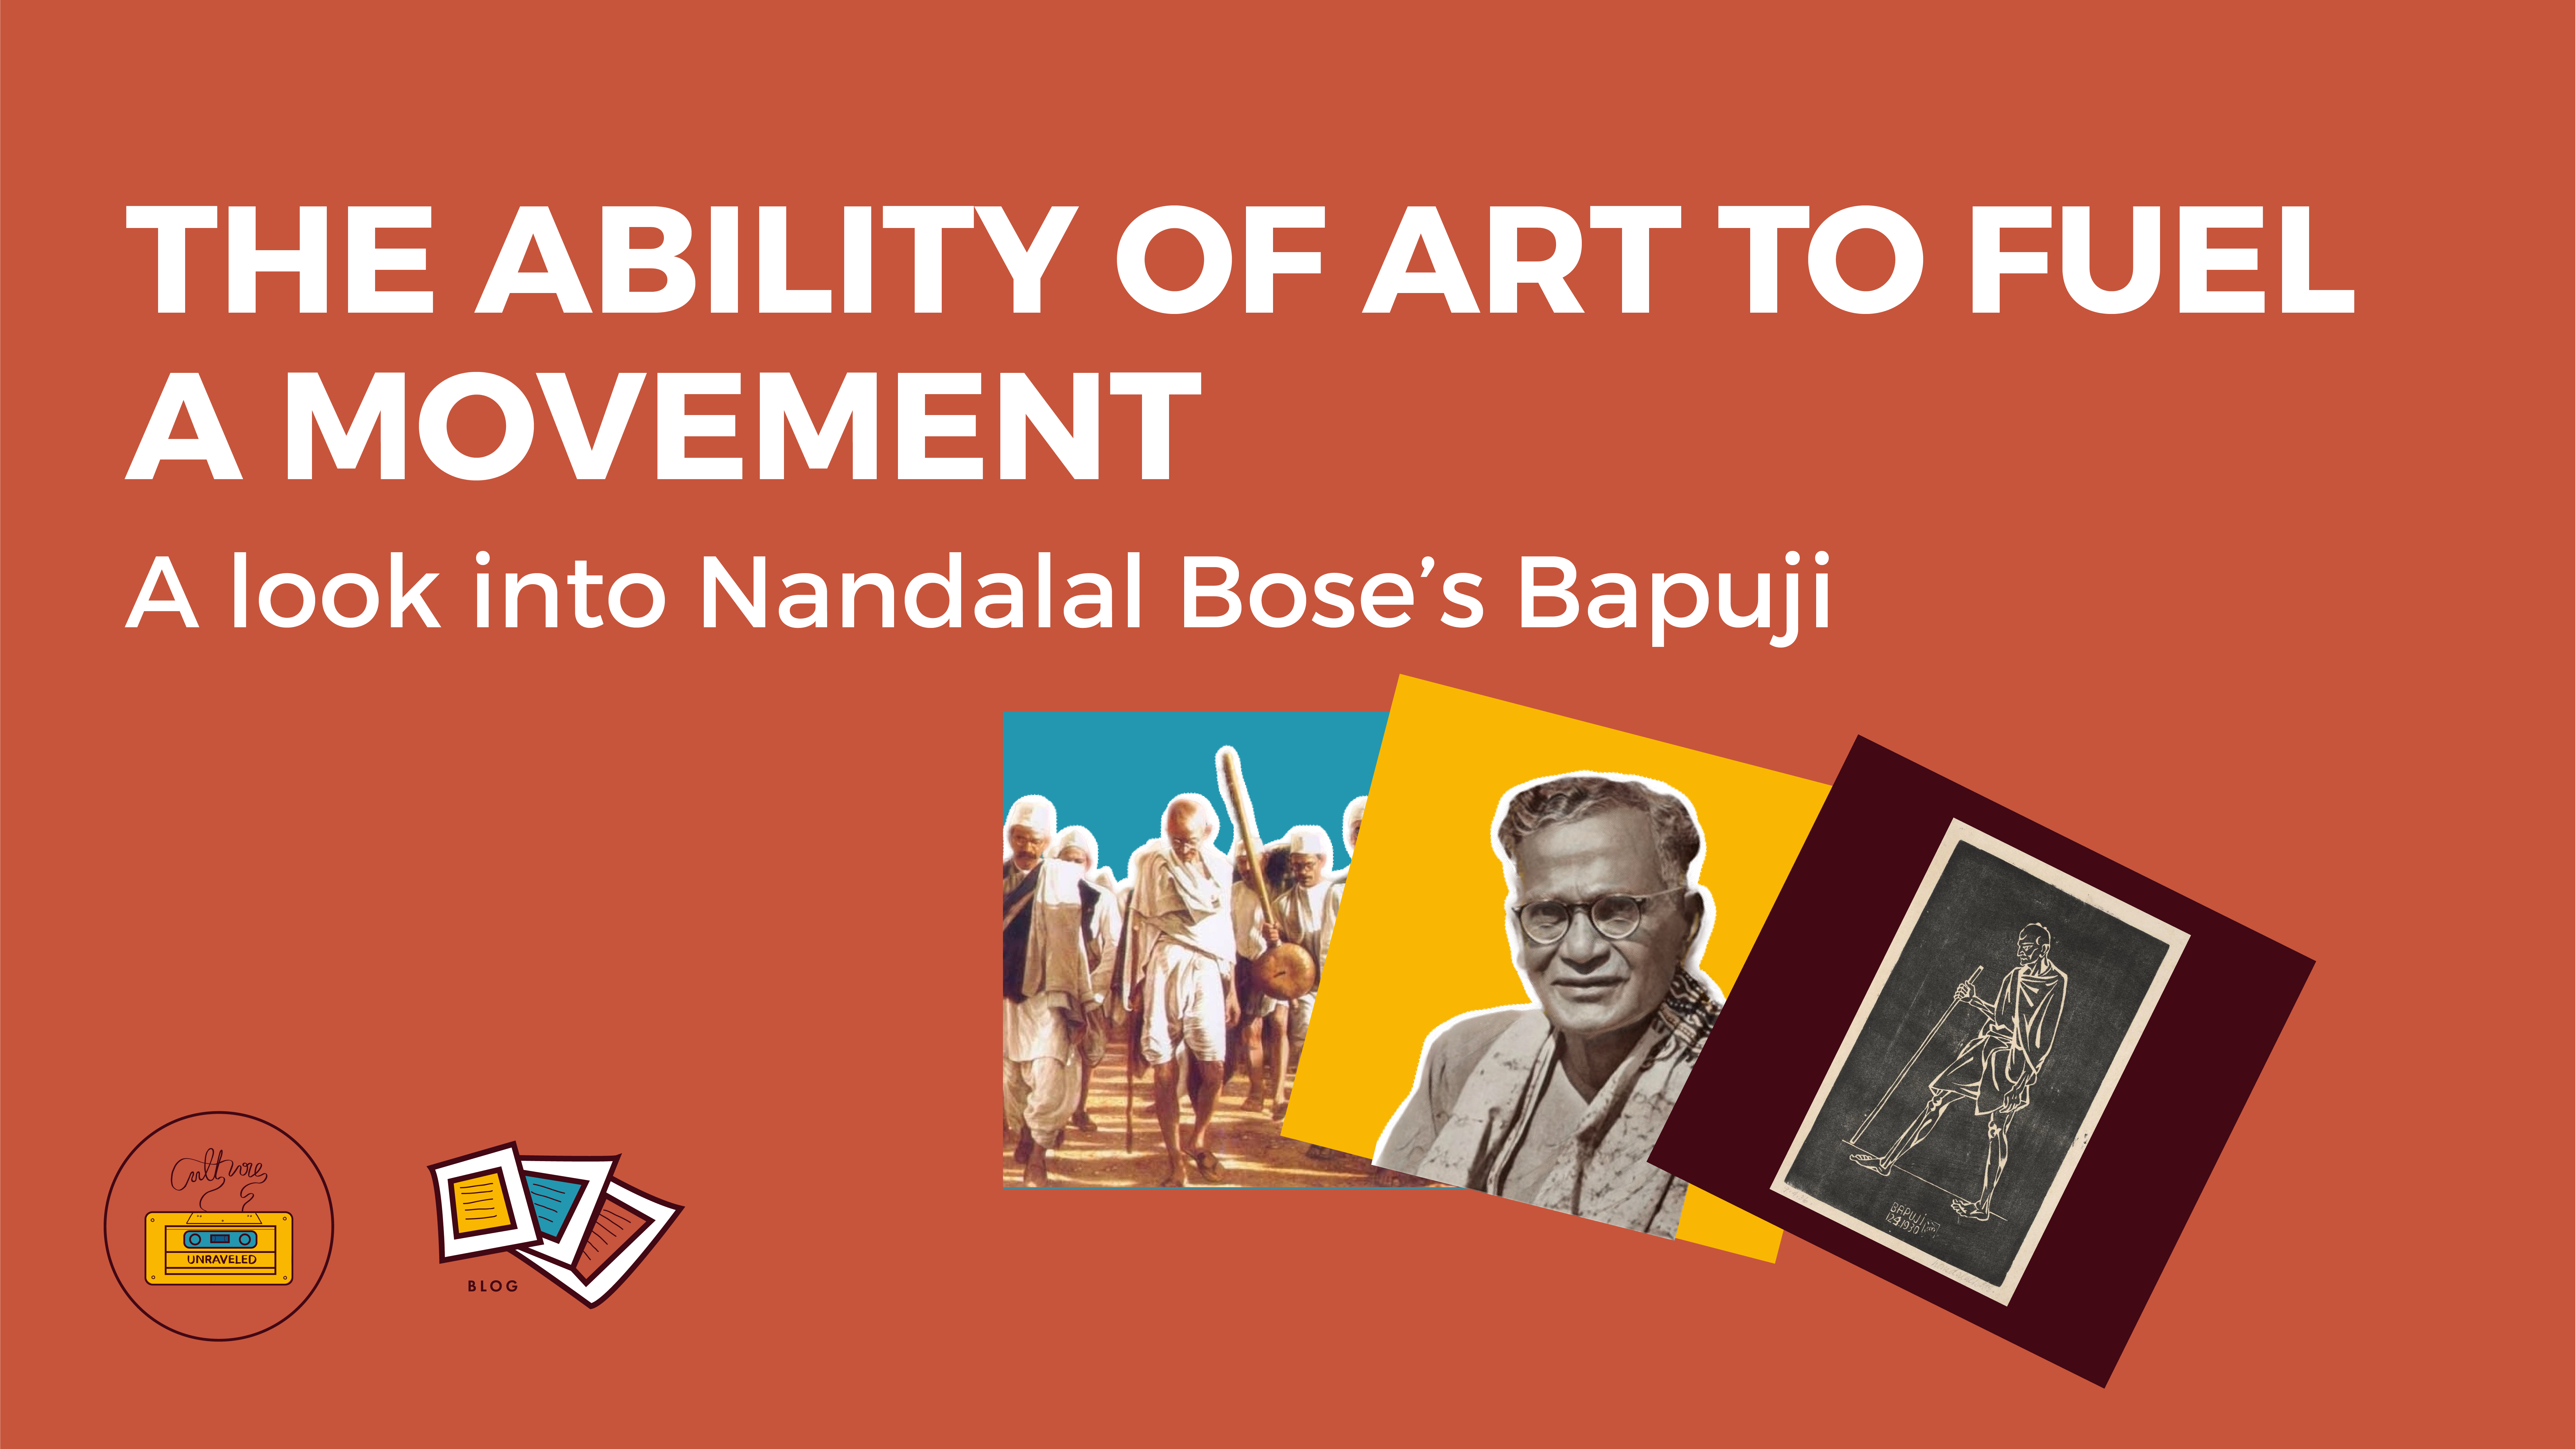 The Ability of Art to Fuel a Movement. A look into Nandalal Bose’s Bapuji